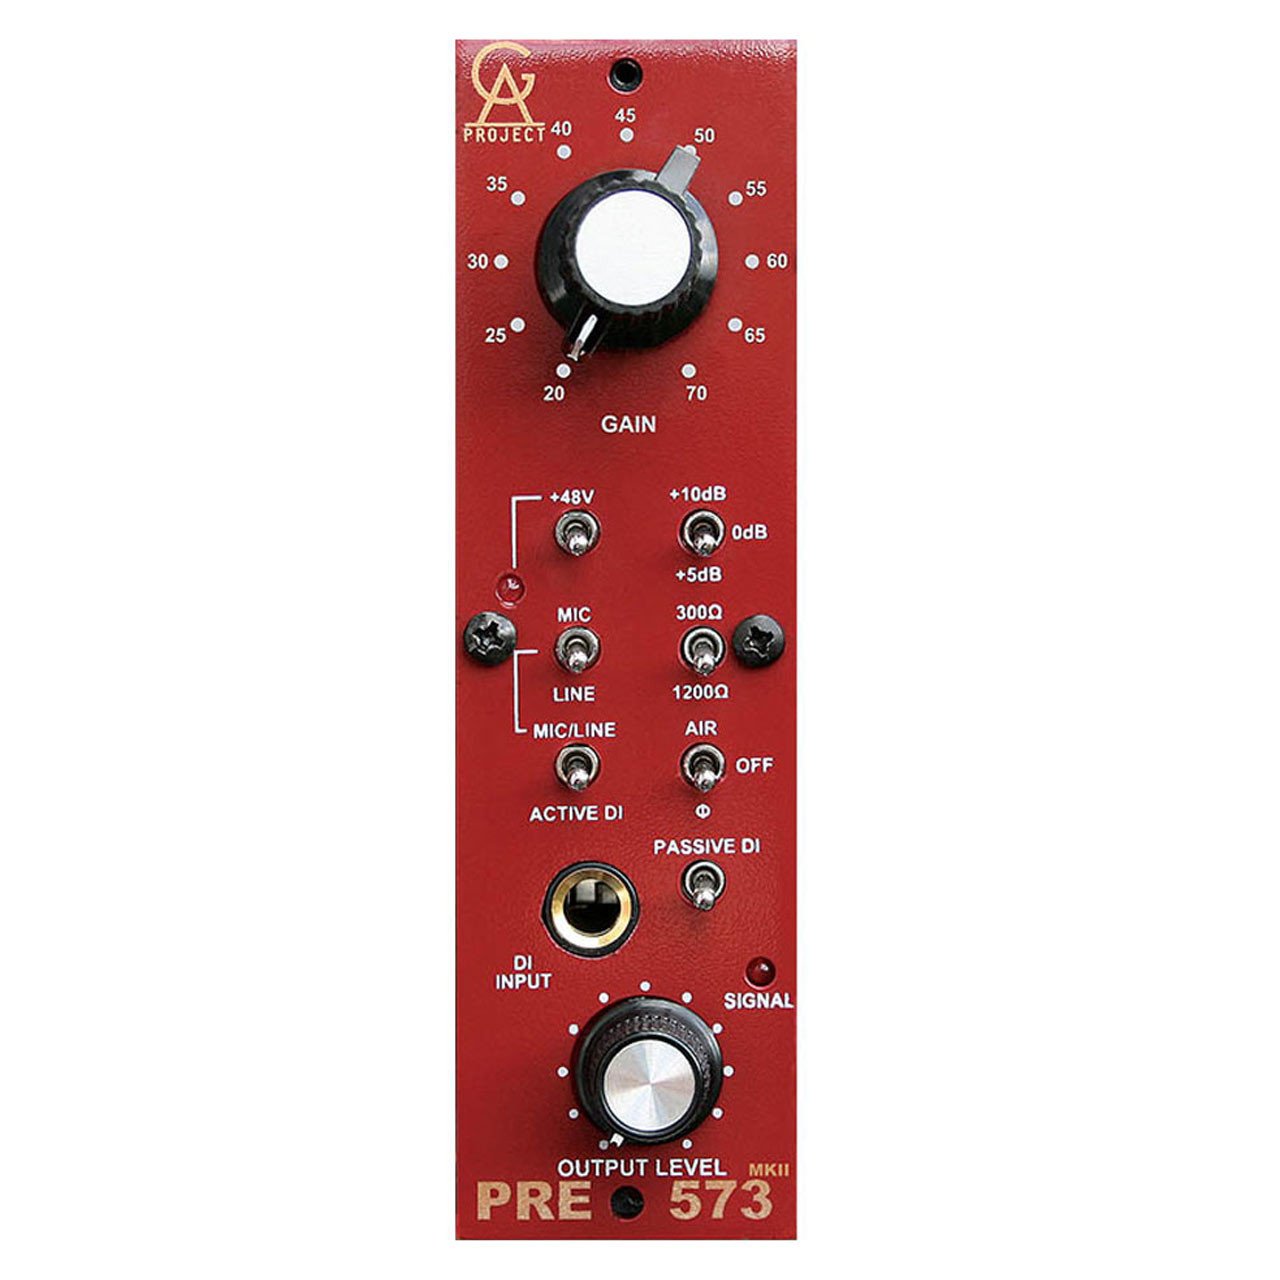 500 Series - Golden Age Project Pre-573 MKII Plus - 500 Format Version Of The PRE-73 MKII